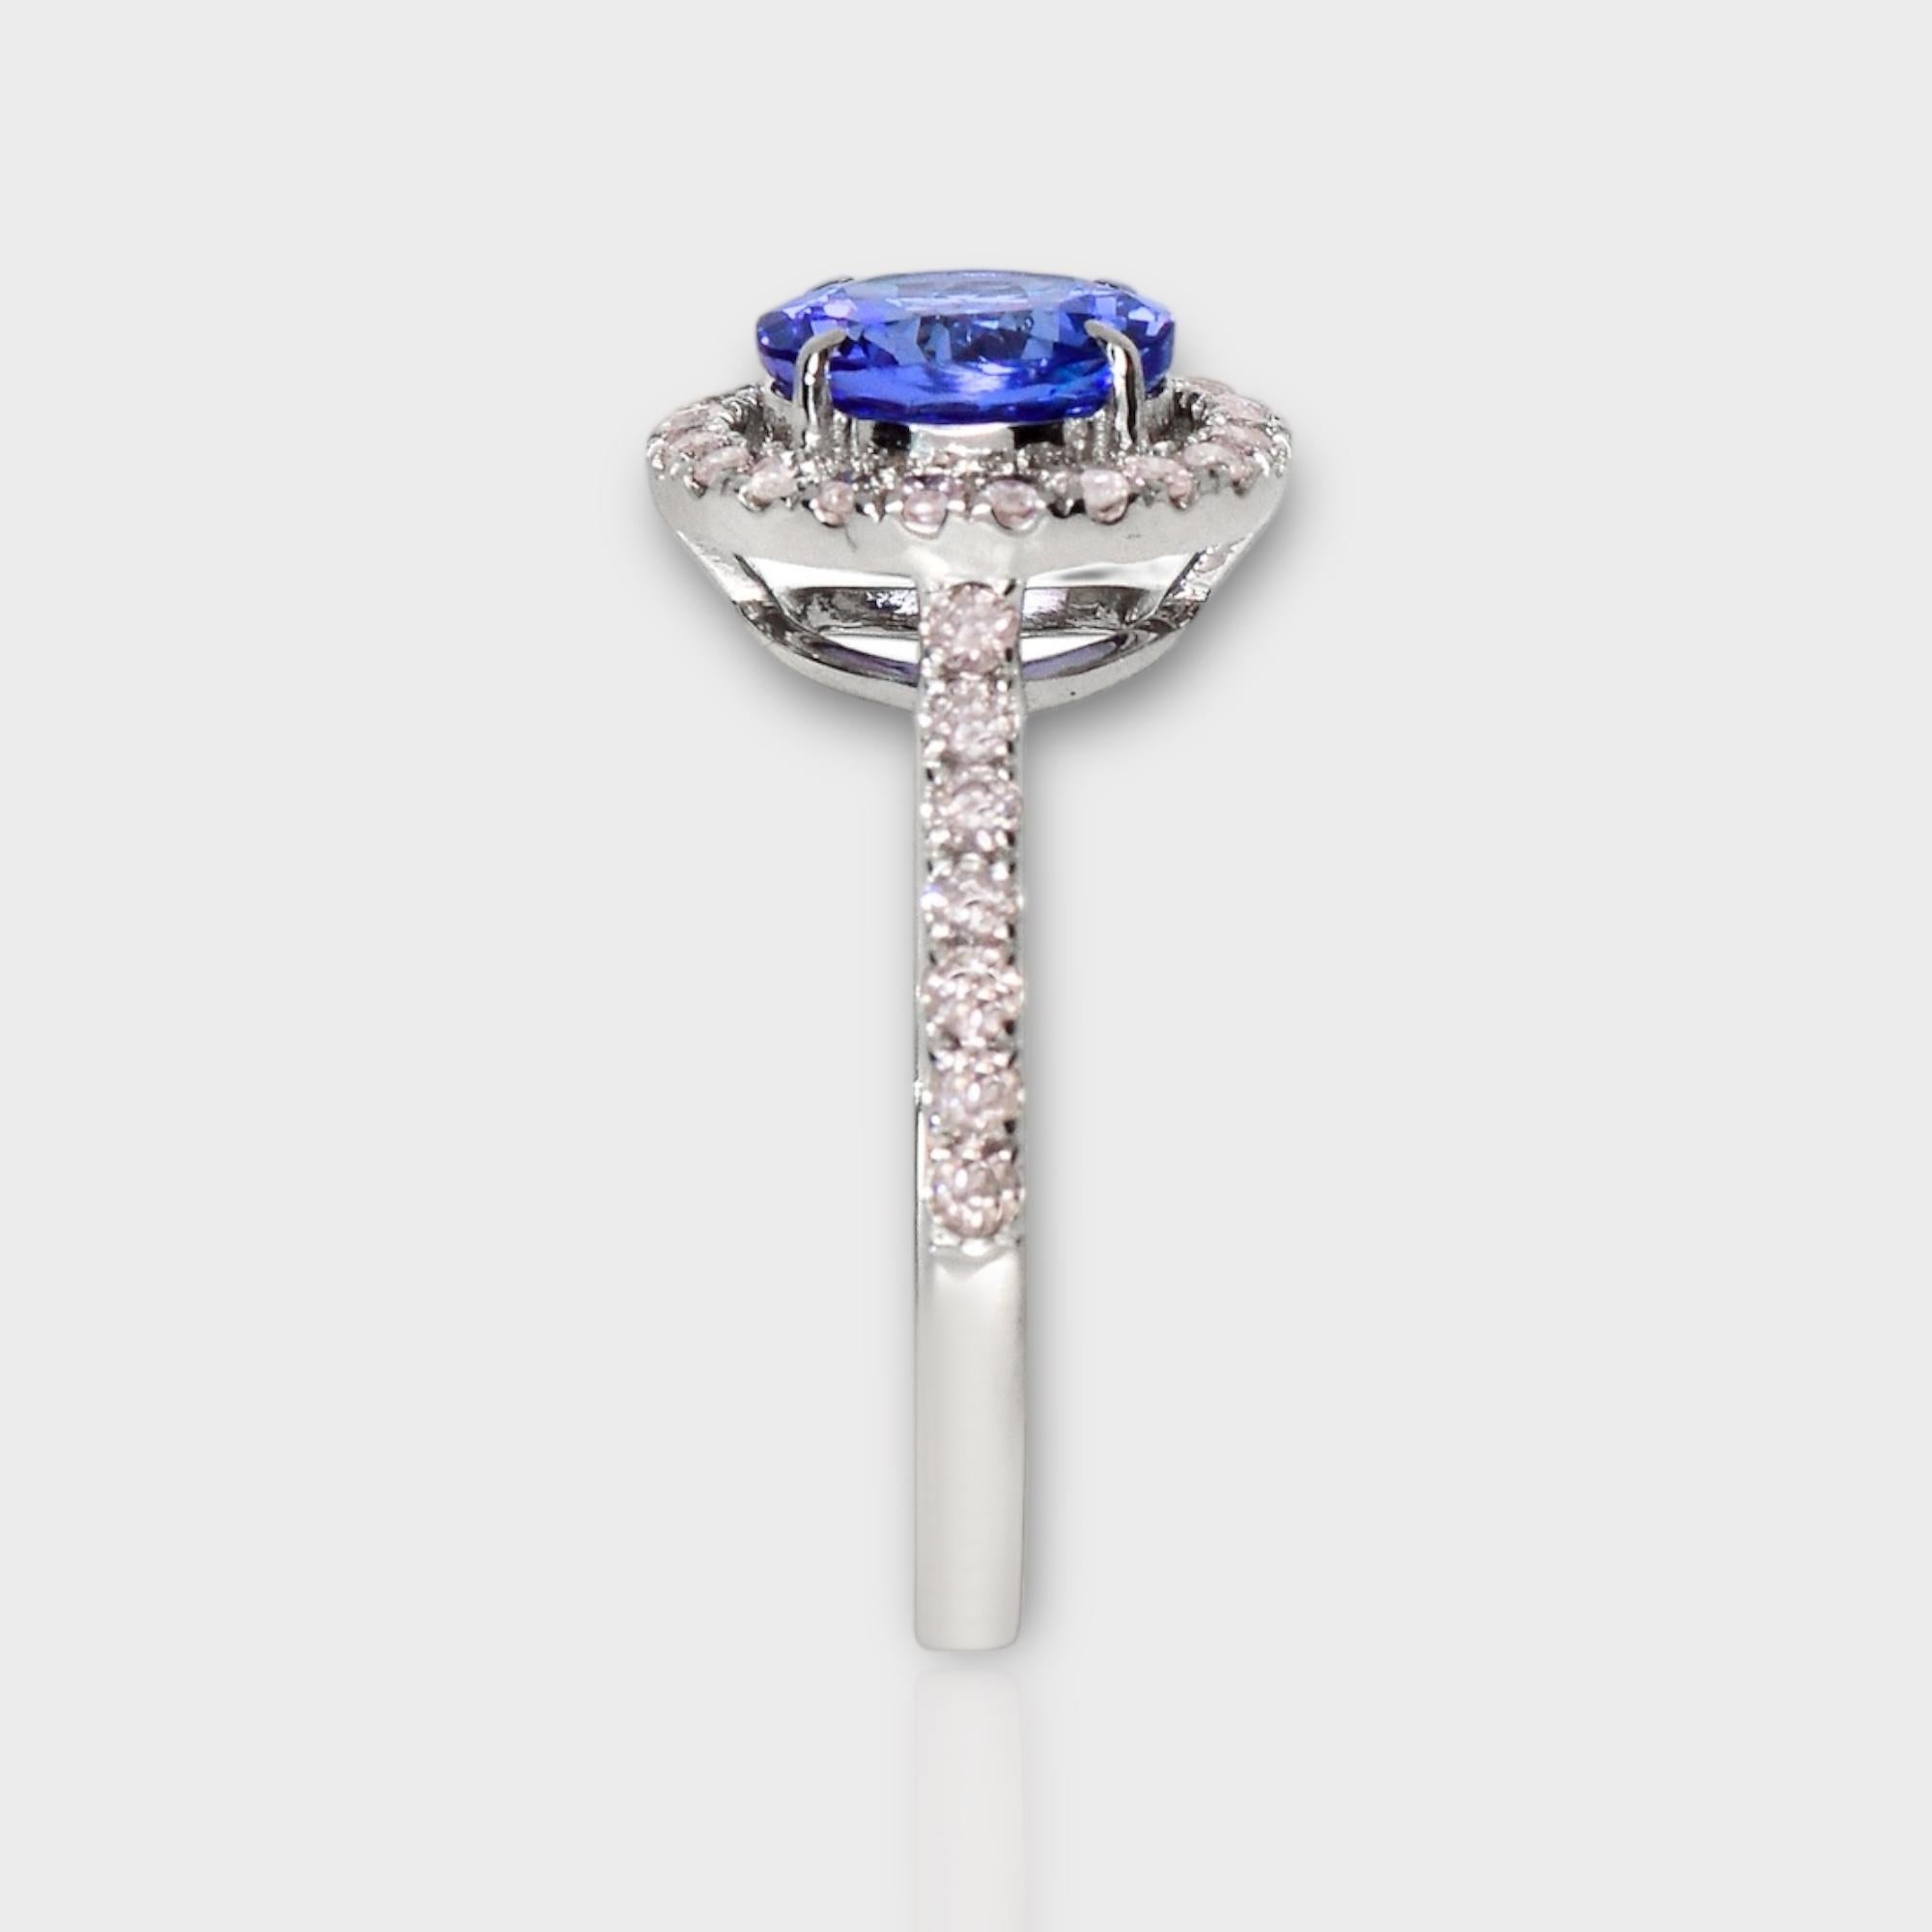 IGI 14K 1.81 ct Tanzanite&Pink Diamond Antique Art Deco Engagement Ring In New Condition For Sale In Kaohsiung City, TW